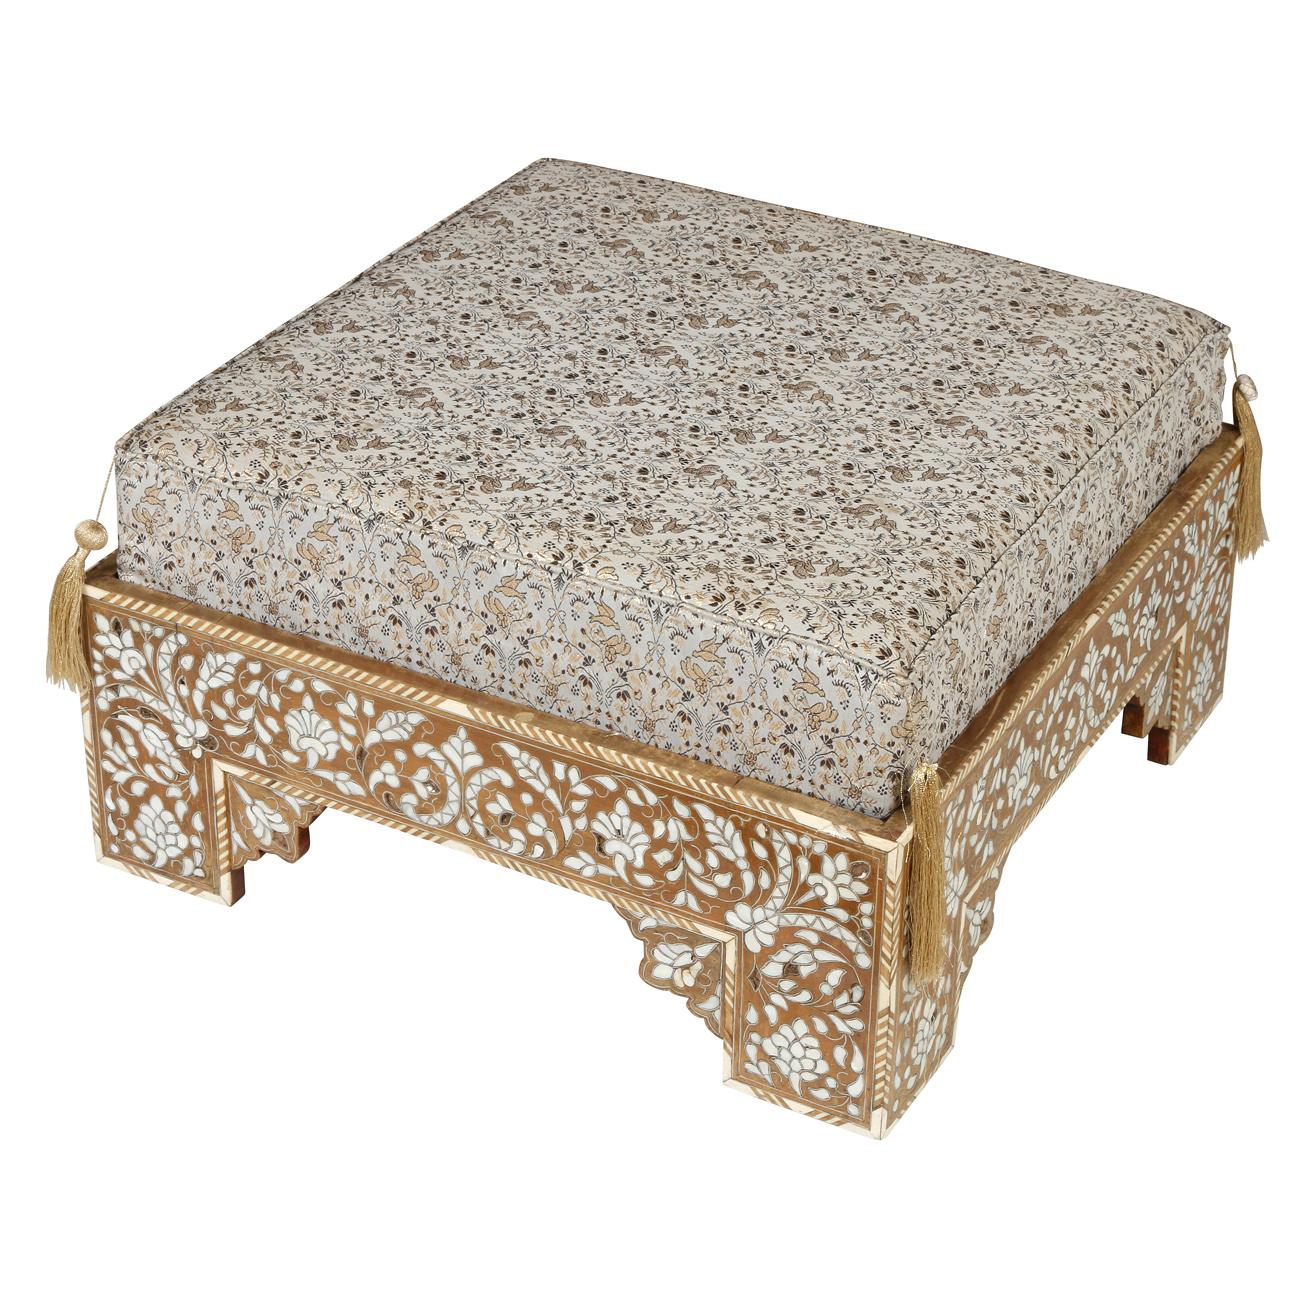 A pair of Moroccan style square ottomans with inlaid design on all sides.